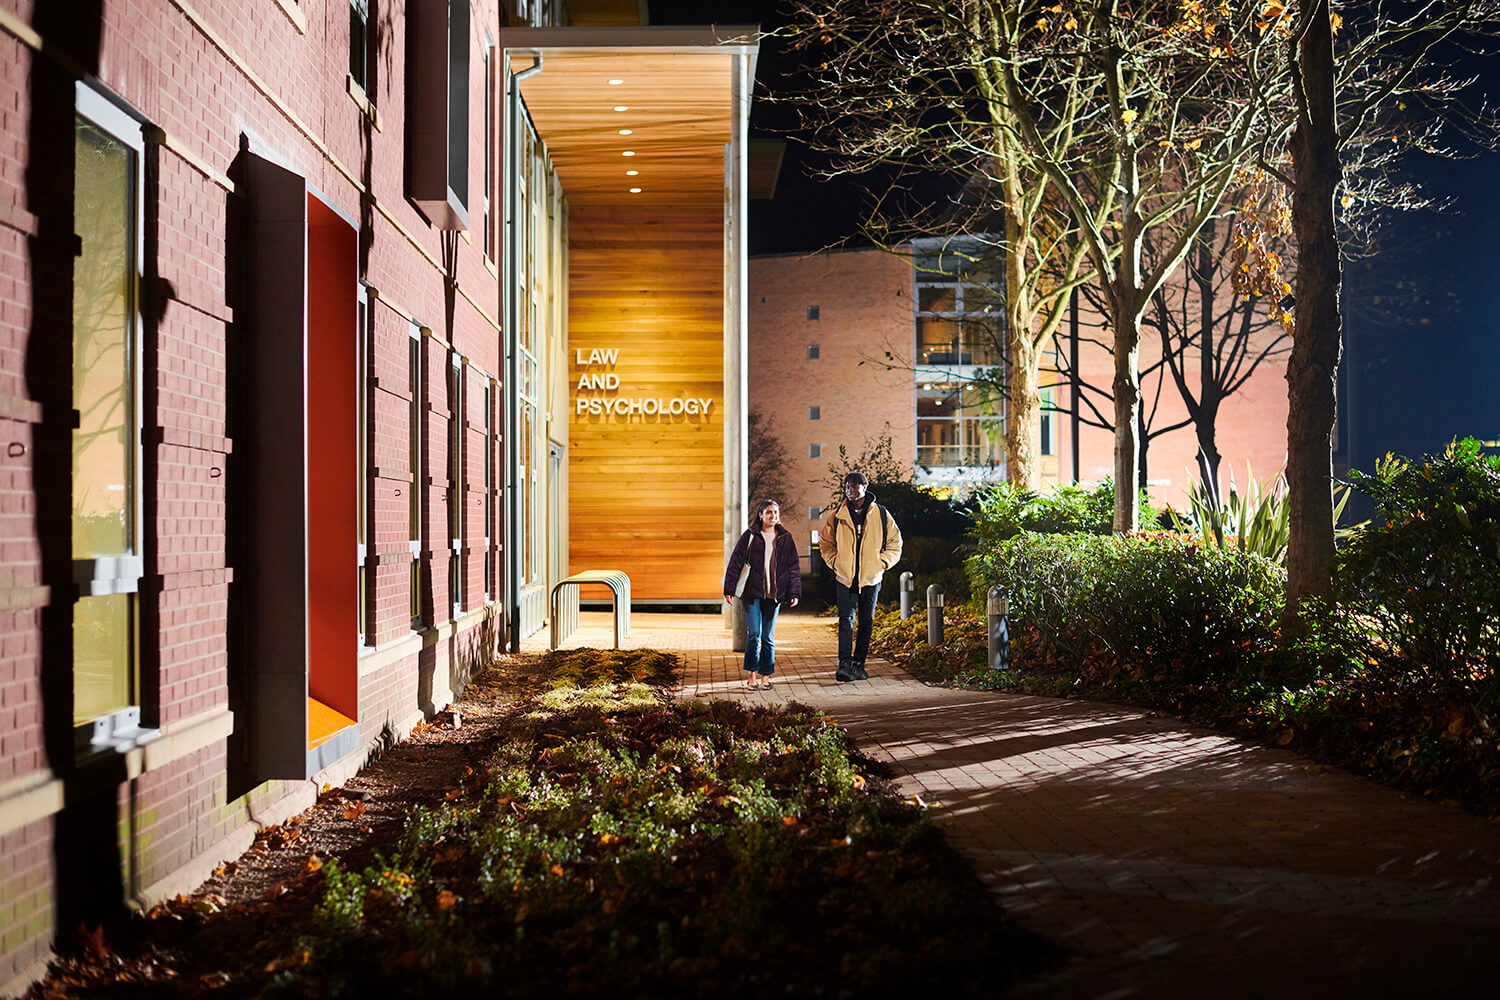 Two students walk outside the Law and Psychology building at night.